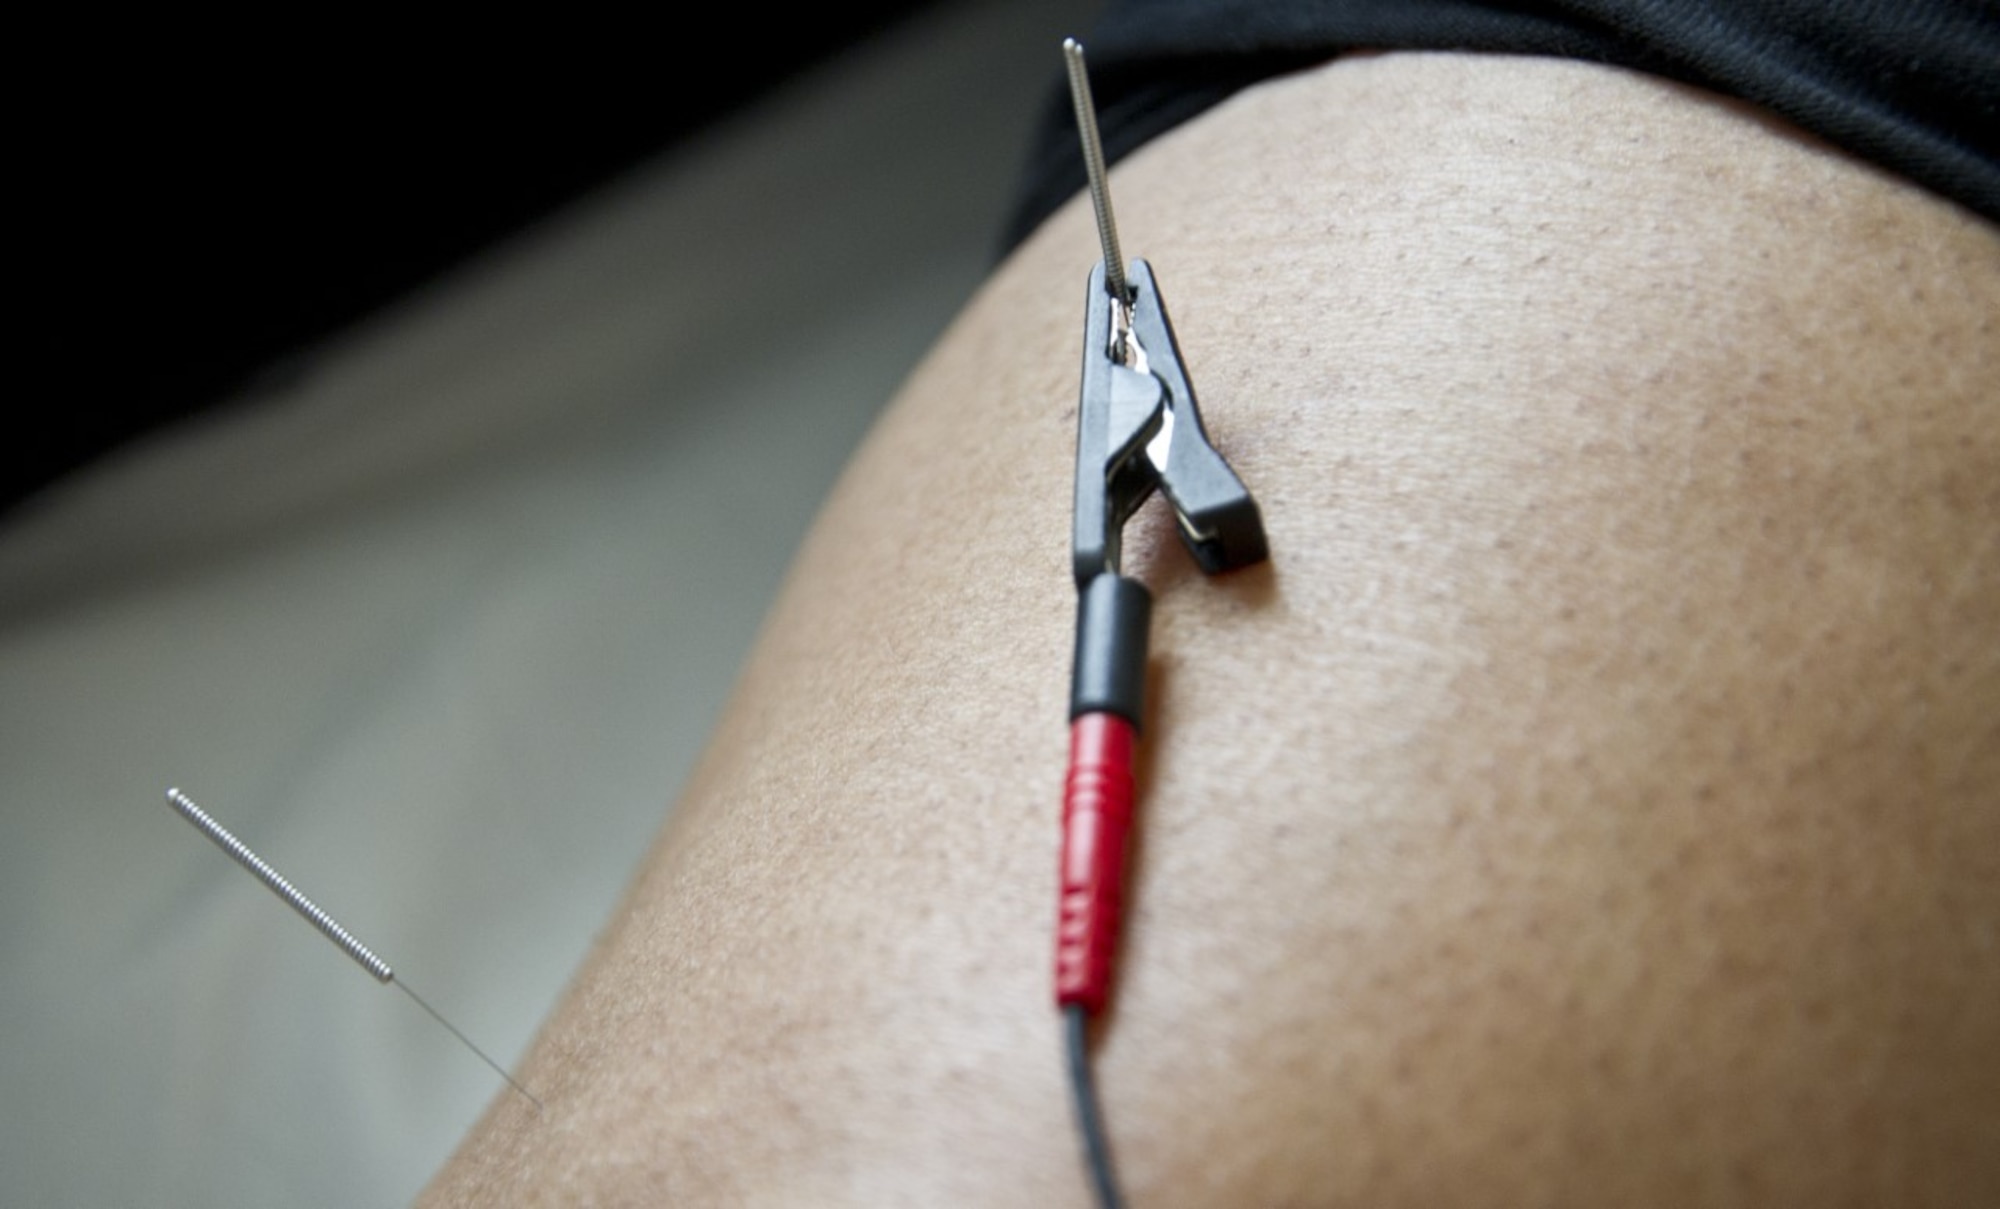 A positive lead transmitting an electrical pulse clings to a needle inserted into the leg of a patient March 28, 2017 at the Air Force Acupuncture and Integrative Medicine Clinic at Joint Base Andrews, Md. With the electro-acupuncture technique, an electrical pulse helps relieve muscle tension and stimulates natural anti-pain chemicals throughout a patient’s body. (U.S. Air Force photo by Staff Sgt. Joe Yanik)